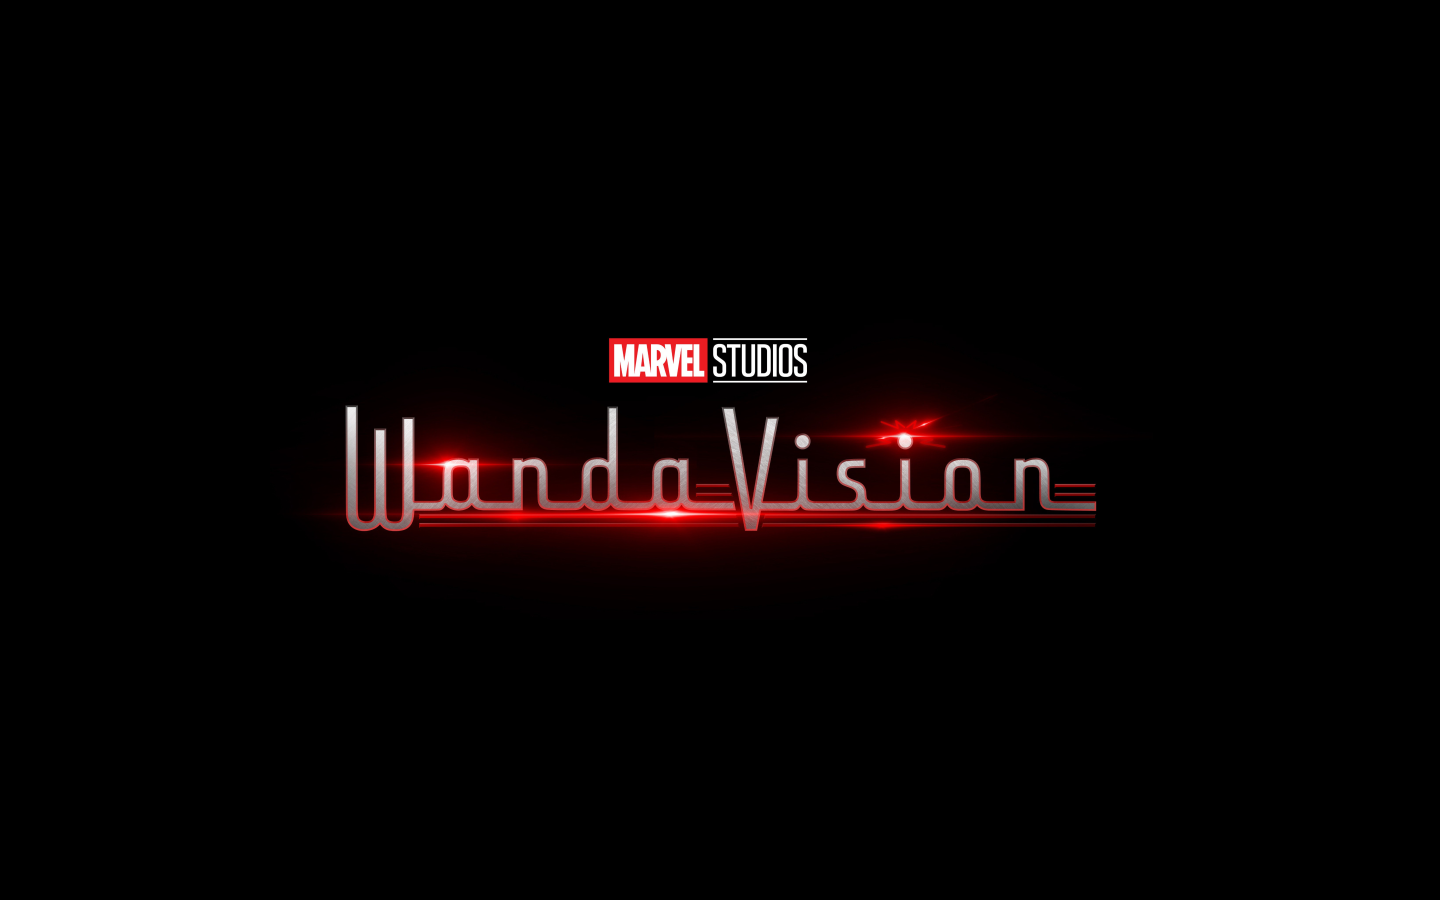 Poster for the new series by Marvel Wanda Vision